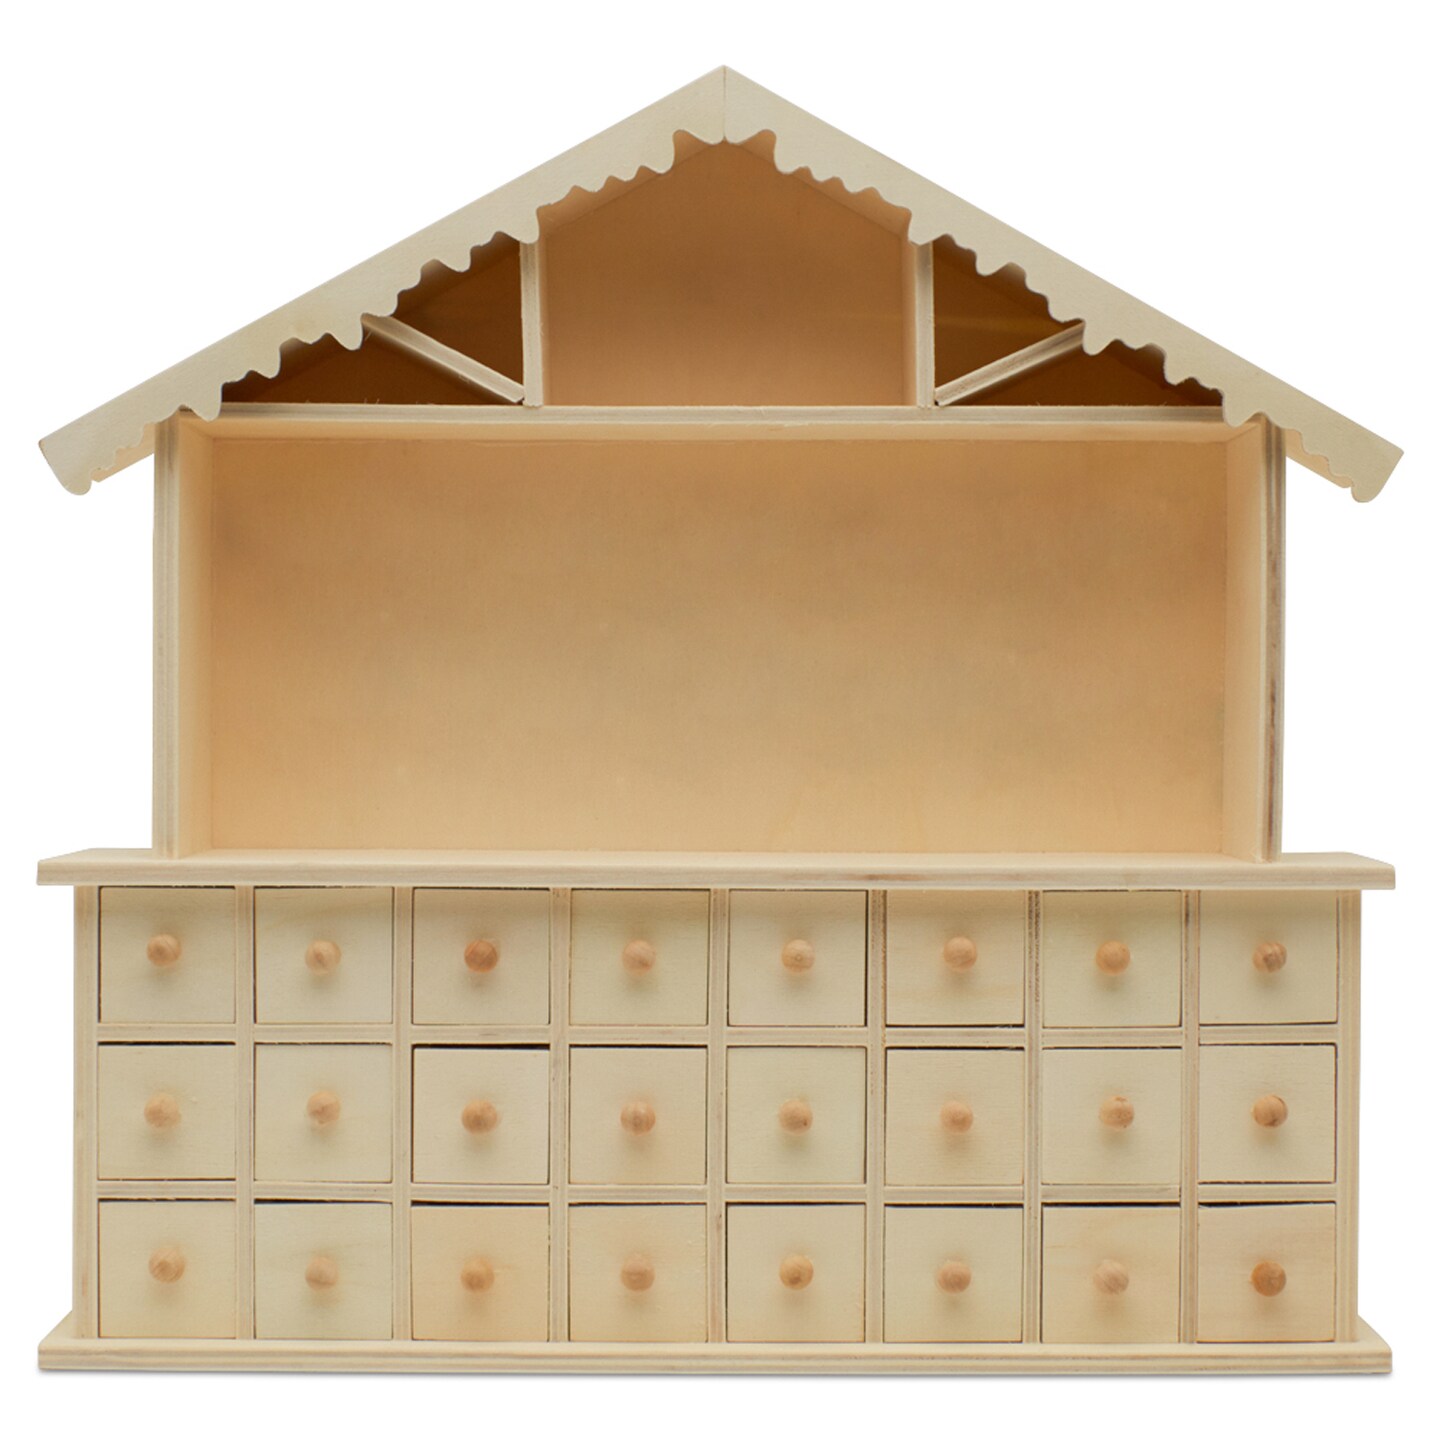 Wooden Advent Calendar, DIY Preassembled, Empty Drawers | Woodpeckers